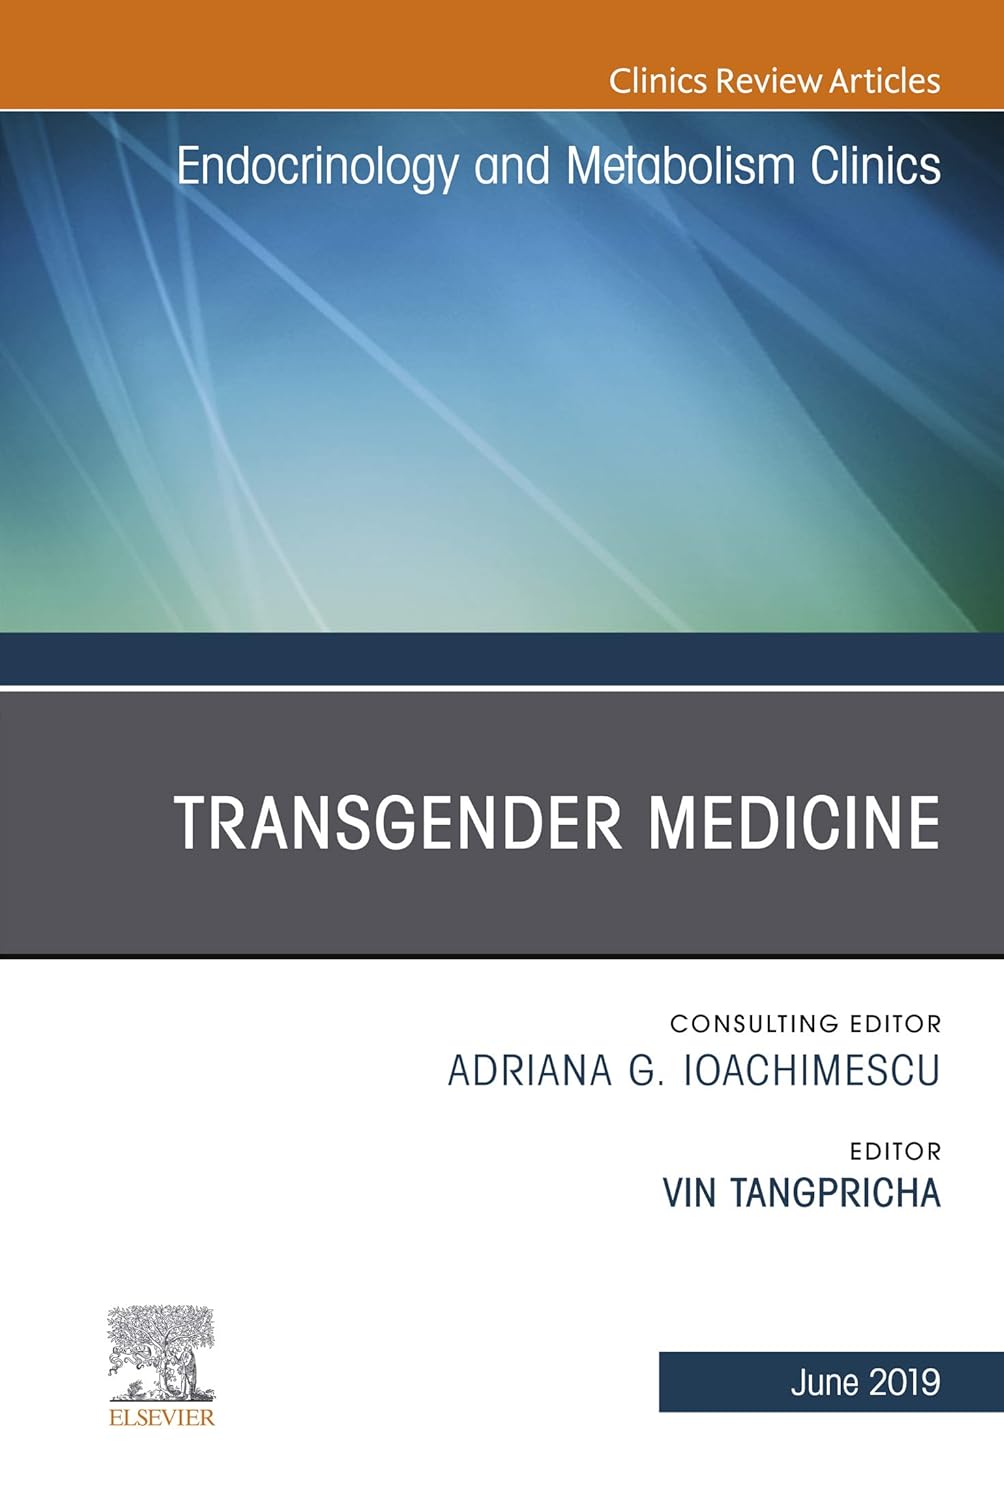 Transgender Medicine, An Issue of Endocrinology and Metabolism Clinics of North America (Volume 48-2) (The Clinics: Internal Medicine, Volume 48-2)  by Vin Tangpricha